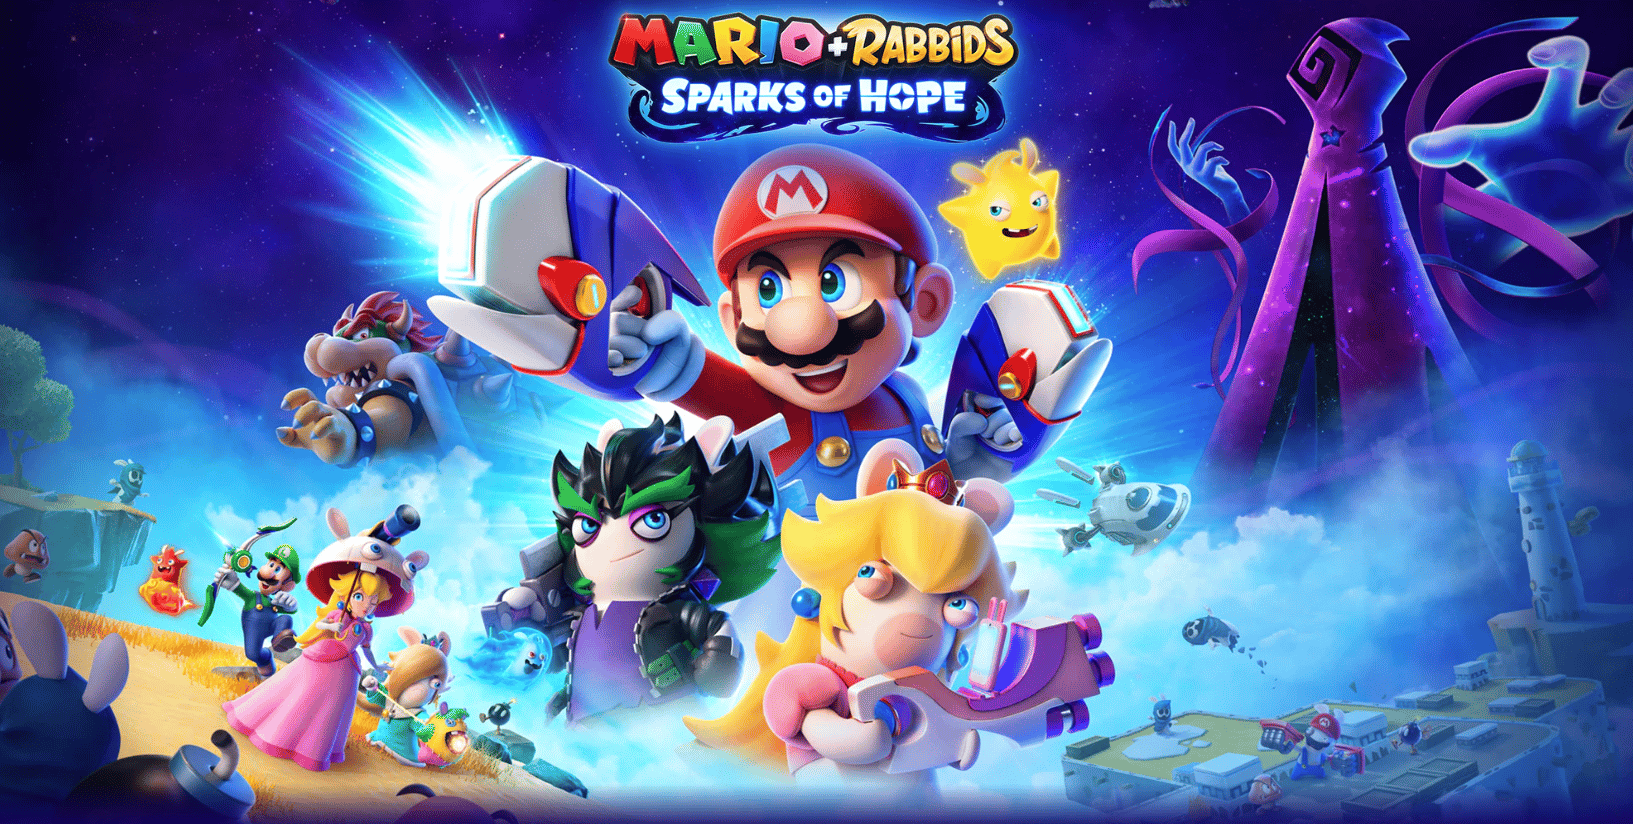 Mario + Rabbids Sparks Of Hope